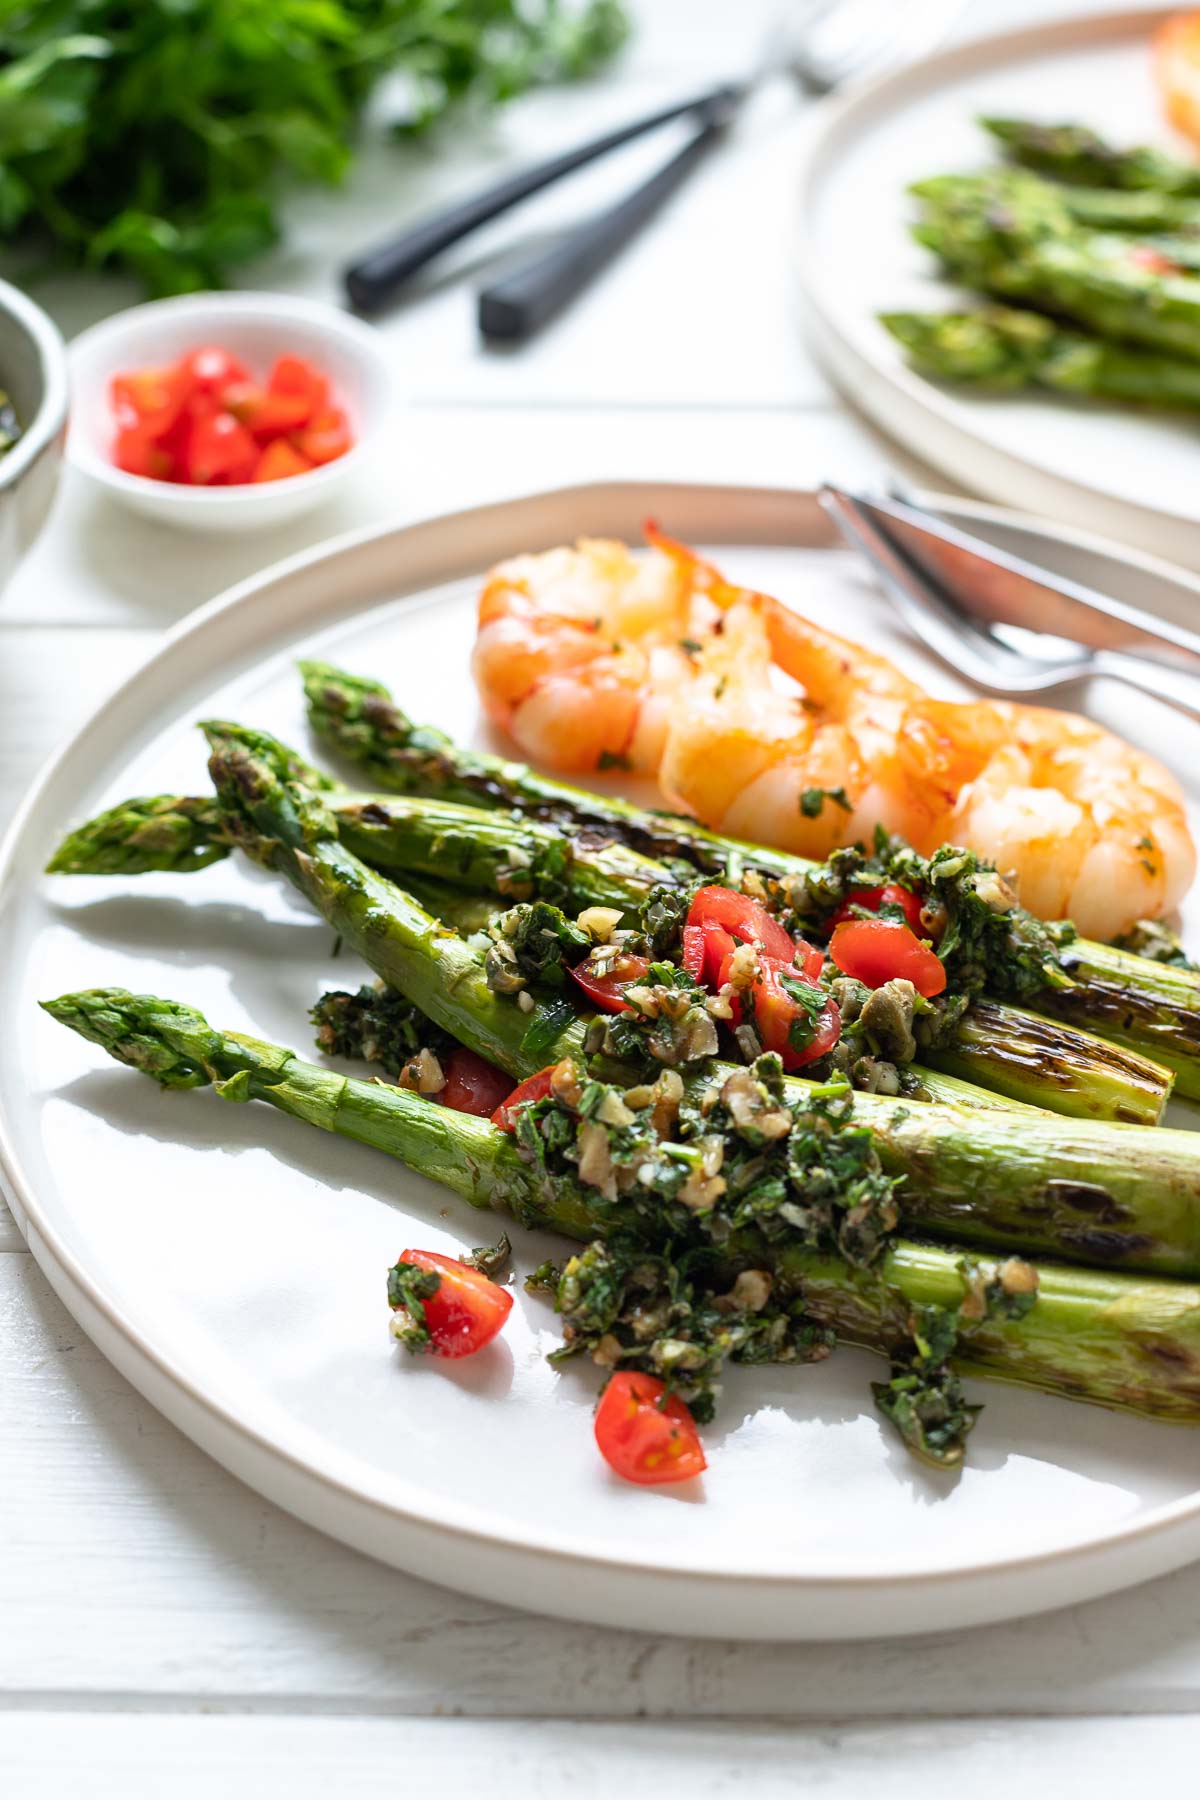 Grilled asparagus with Italian salsa verde & king prawns recipe